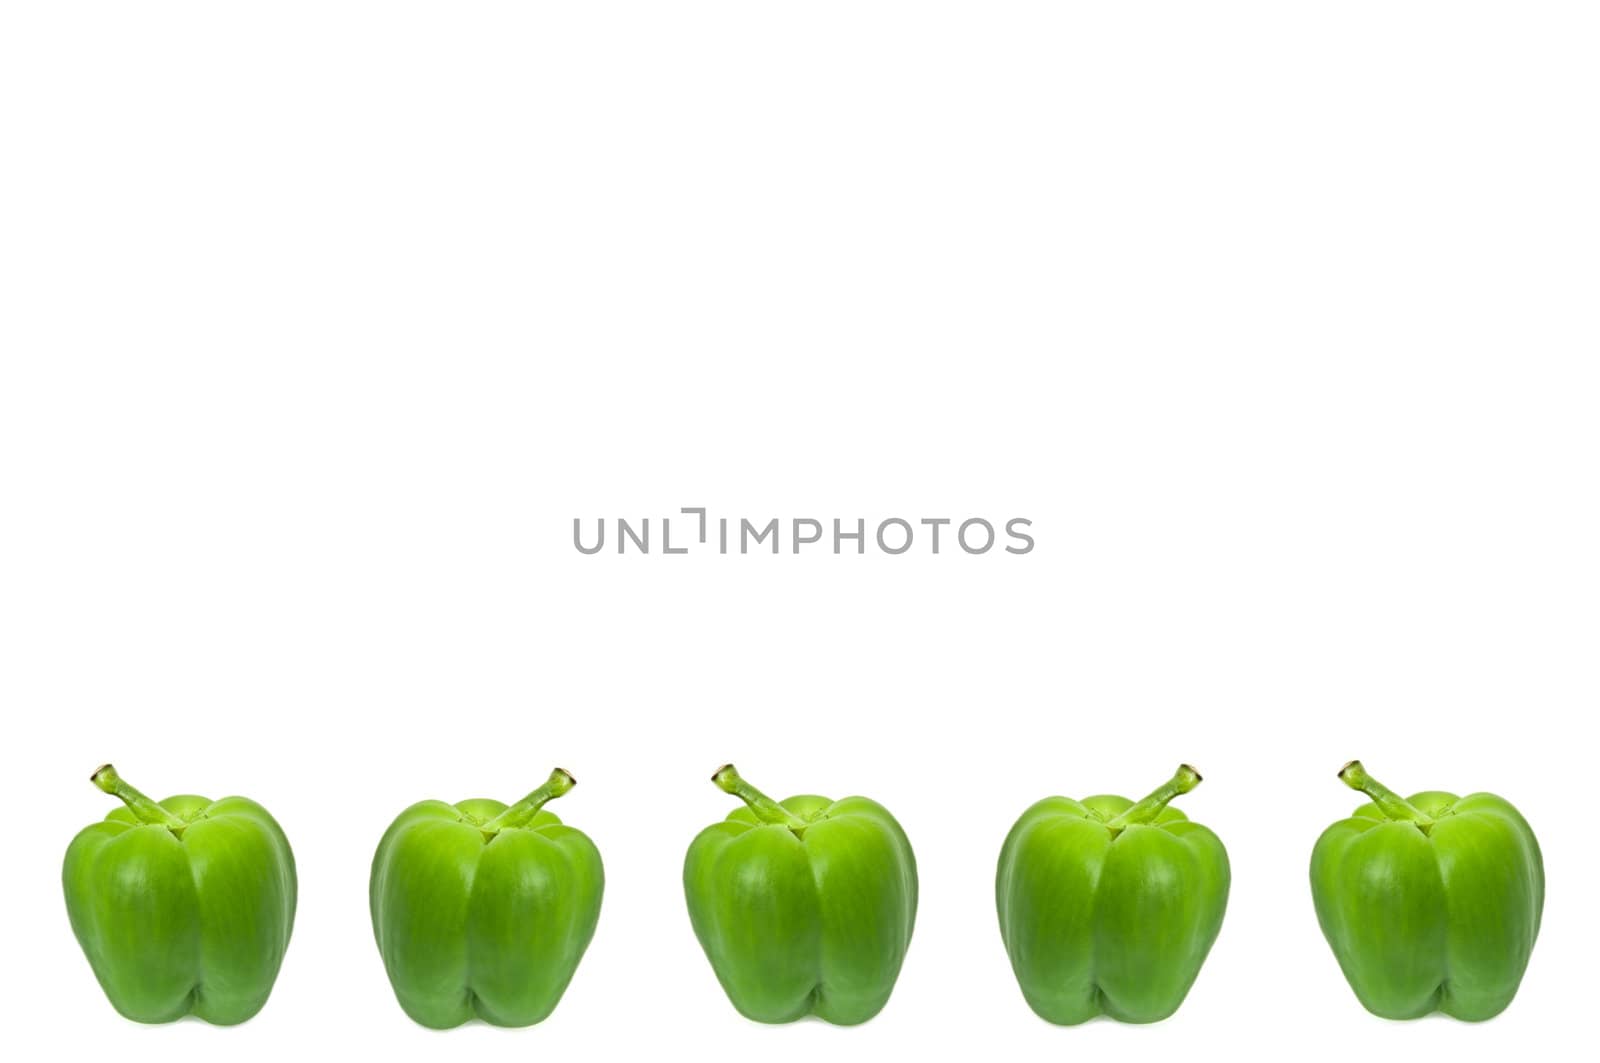 Five small whole green peppers arranged horizontally along the bottom border of the image over white.